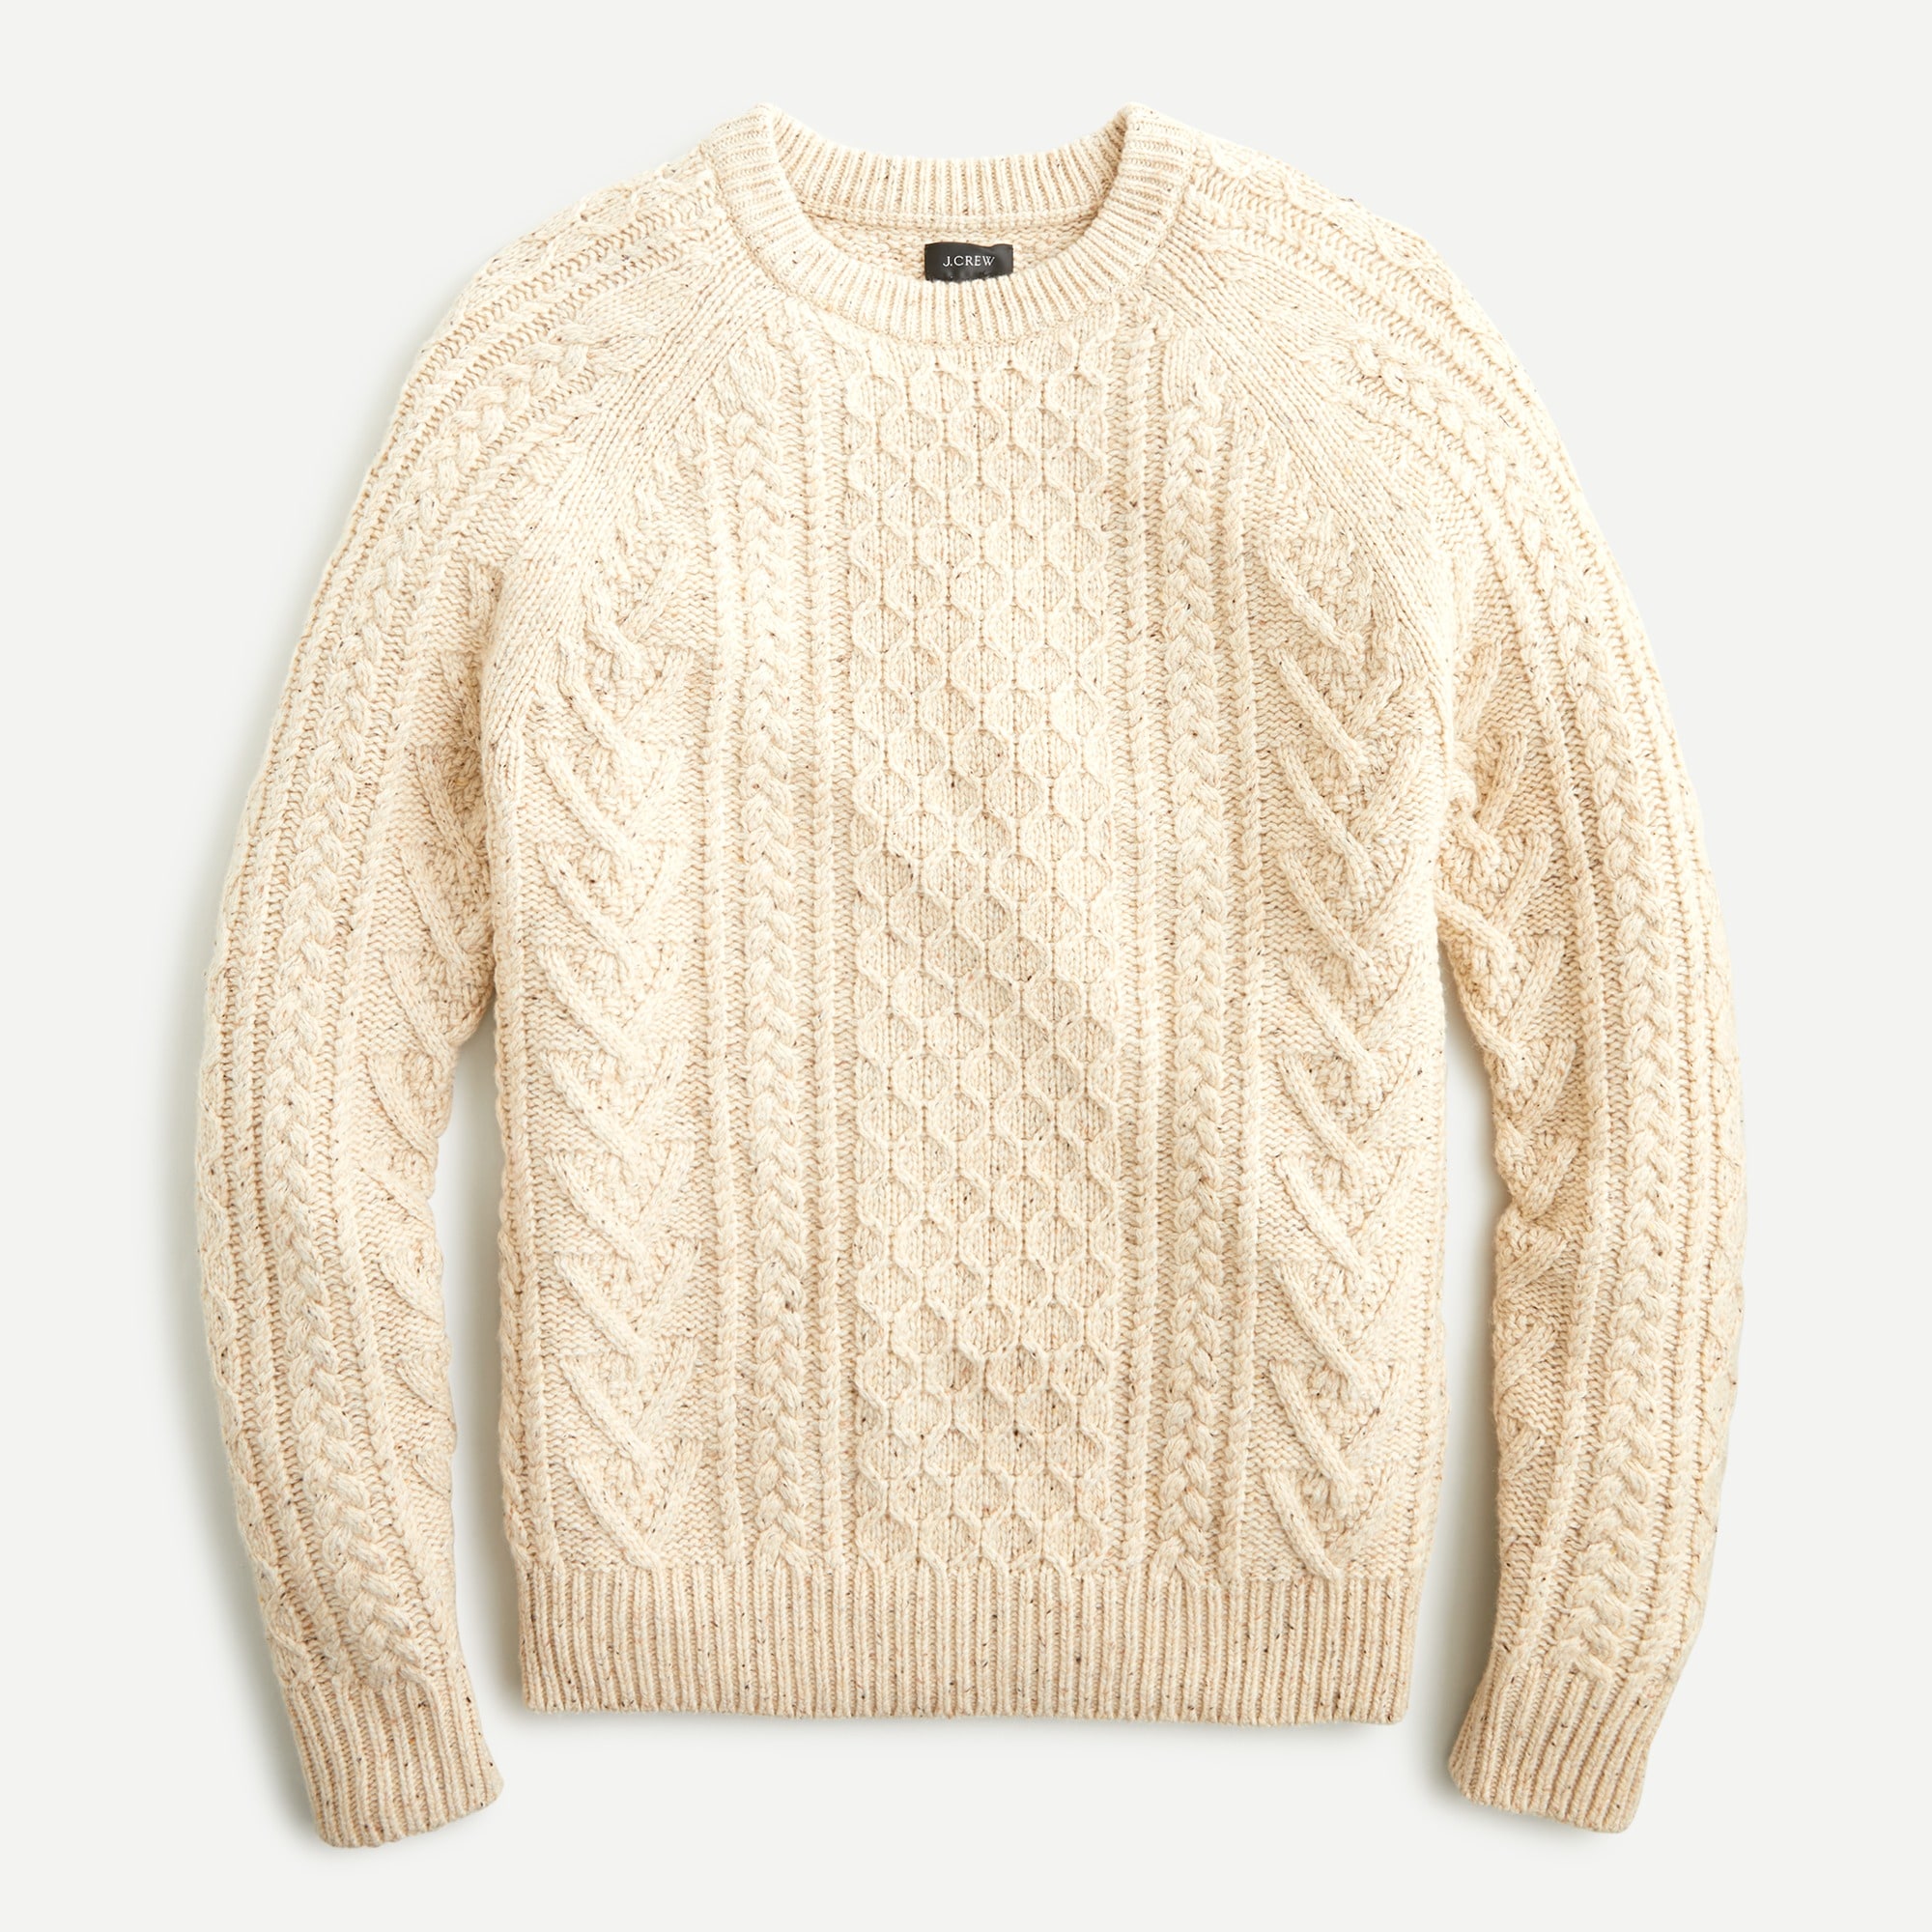 J.Crew: Rugged Merino Wool-blend Donegal Cable-knit Crewneck